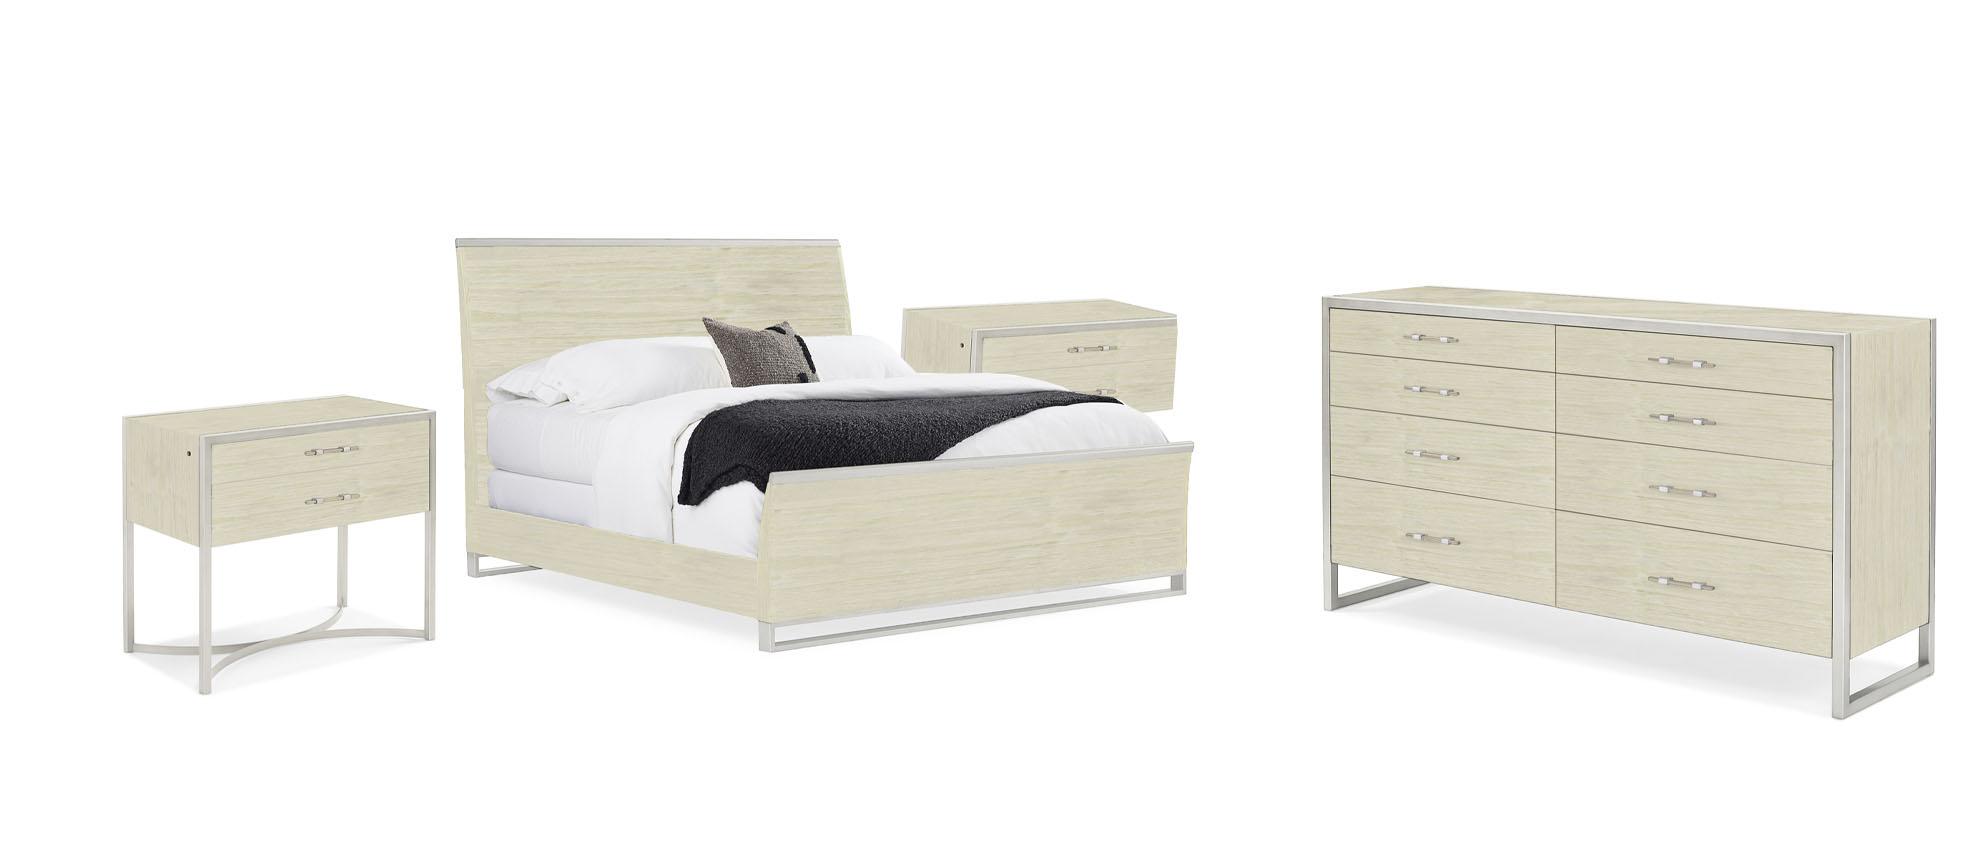 Contemporary Sleigh Bedroom Set REMIX WOOD BED / REMIX LARGE NIGHTSTAND M113-019-102-Set-4 in Pearl 